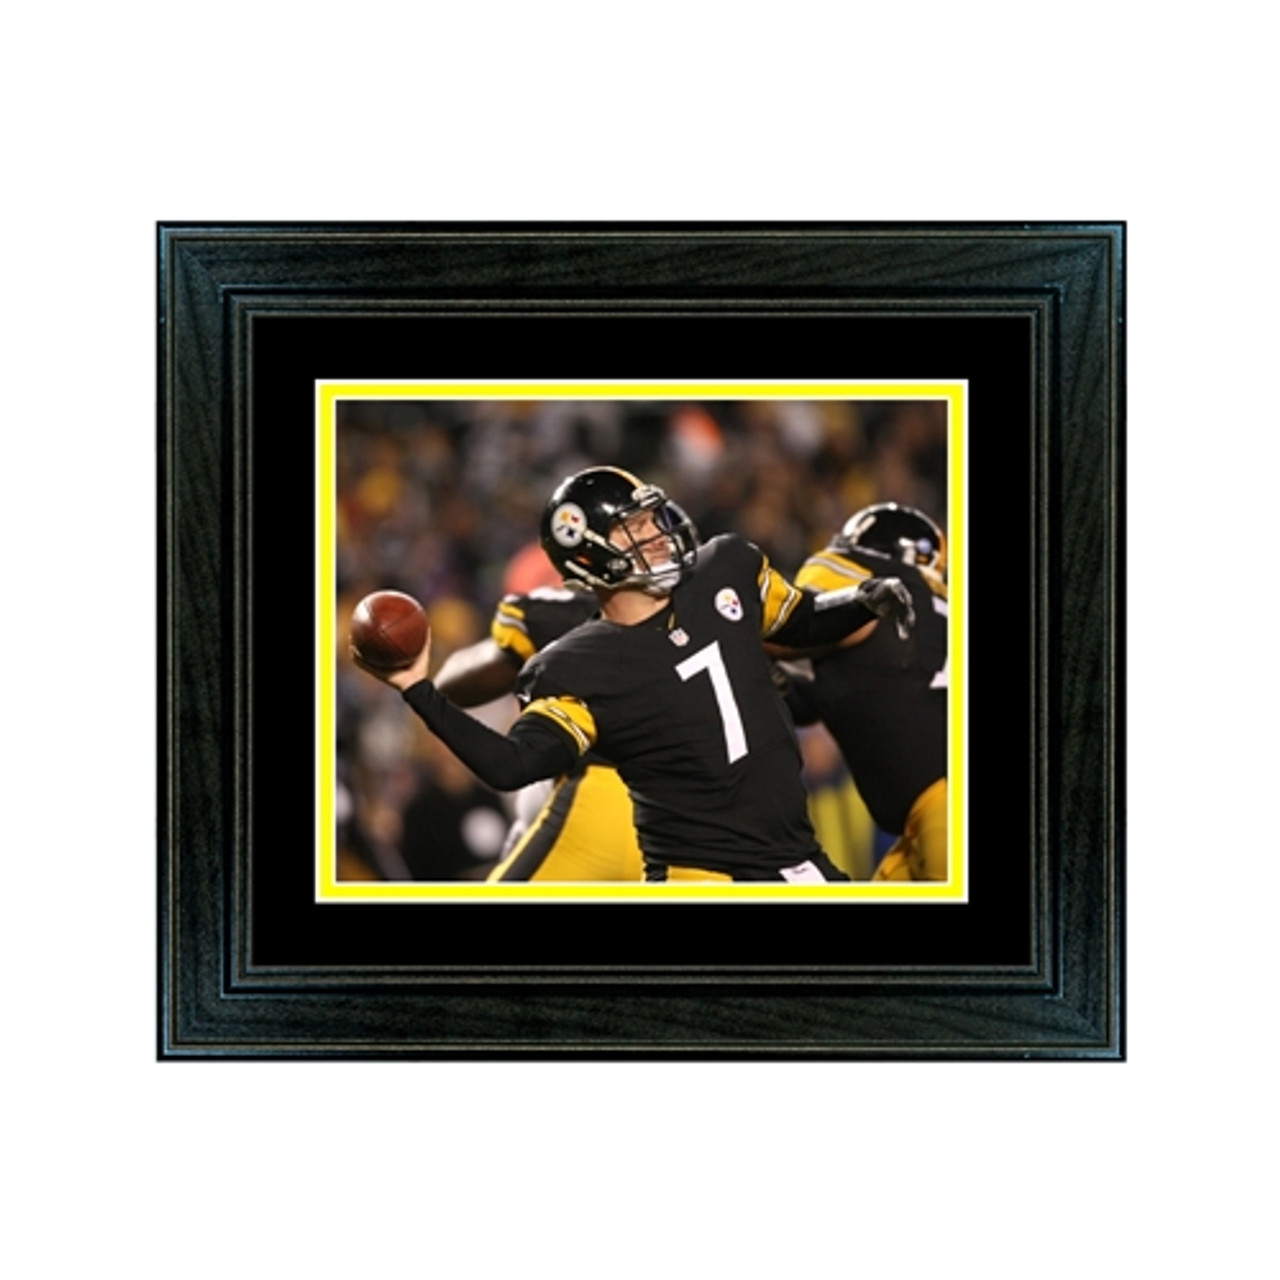 8x10 Matted Frame, Free Shipping